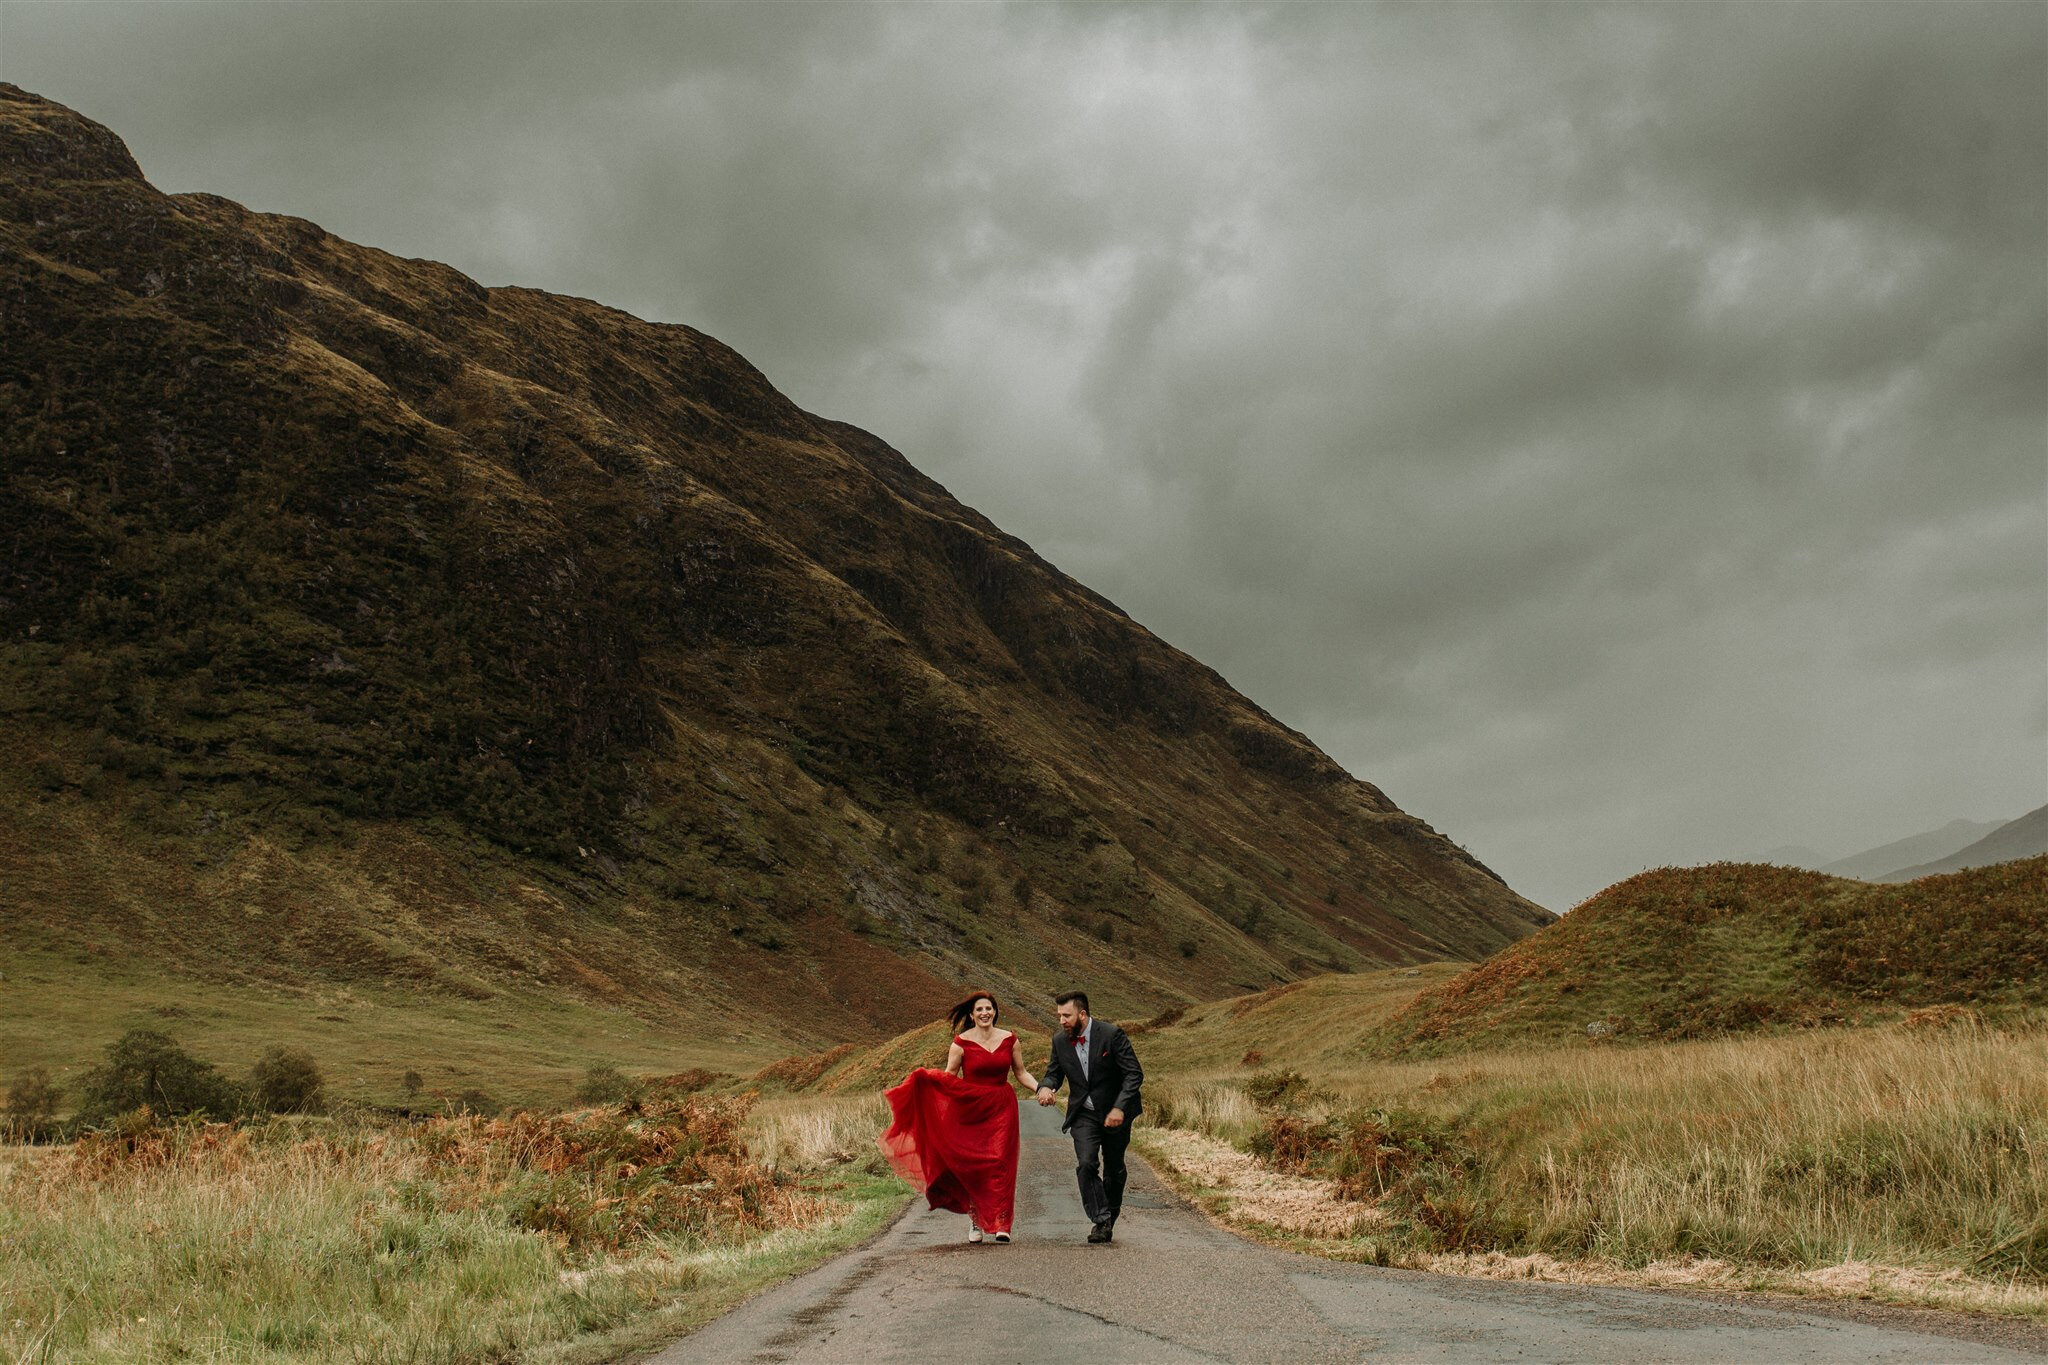 Glen Coe Scotland adventure elopement session. Bride in red dress and her groom walk hand in hand down a road in the windy Scottish Highlands | Adventure elopement photographer